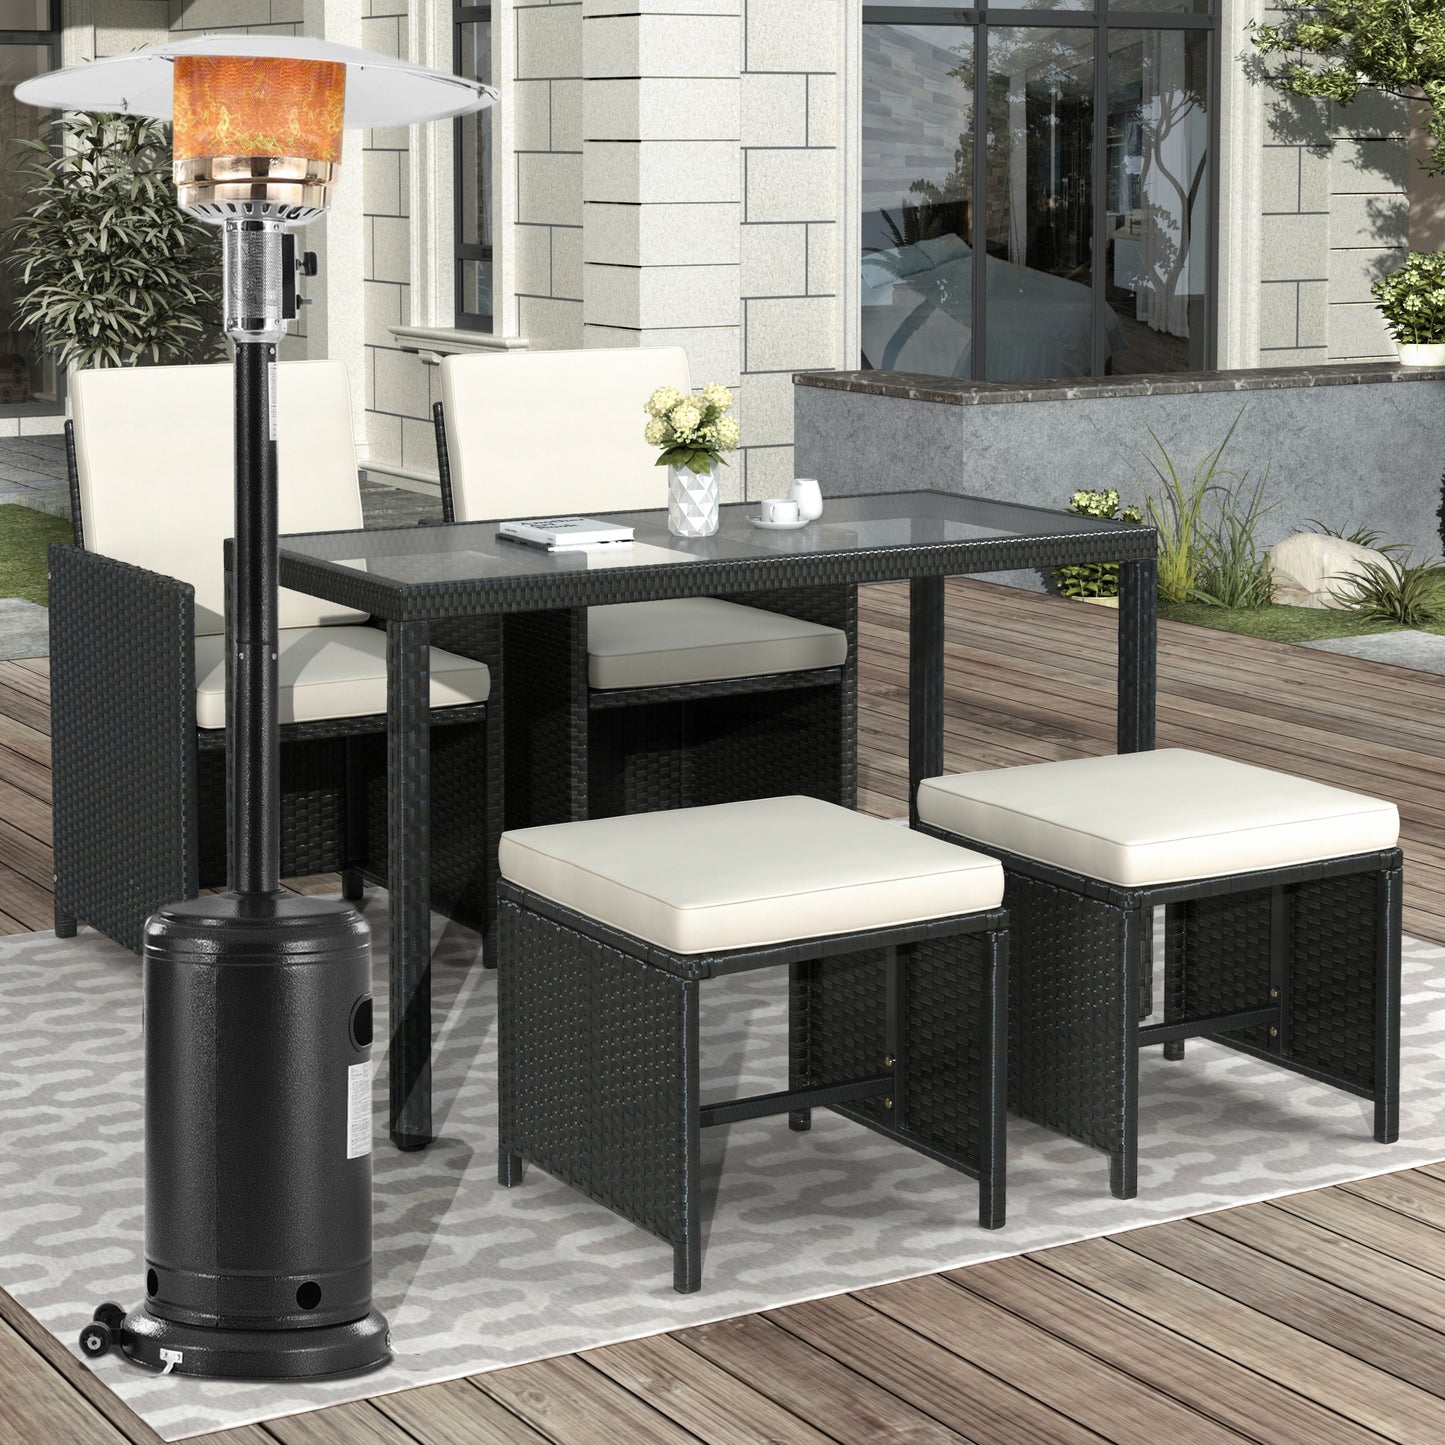 48000BTU Outdoor Heaters with Propane, Patio Heaters Propane for Outdoor Use with Wheels, Simple Ignition System for Inside Outside, Black, LJ2746